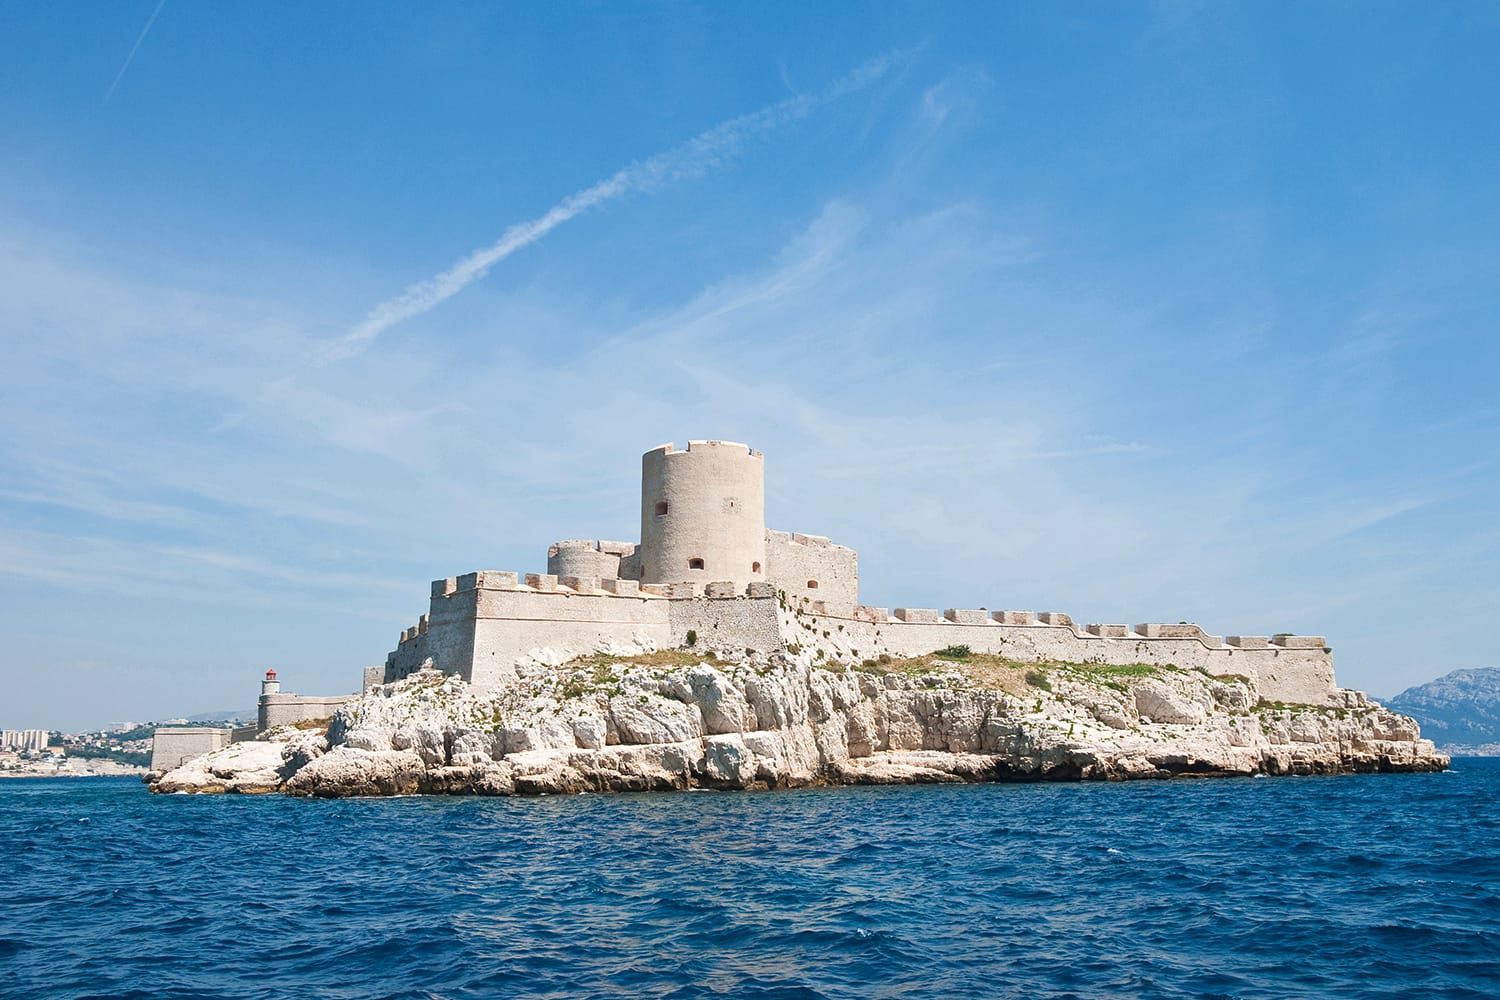 Chateau d'If, famous prison mentioned in Dumas Monte Cristo novel, Marseille, France